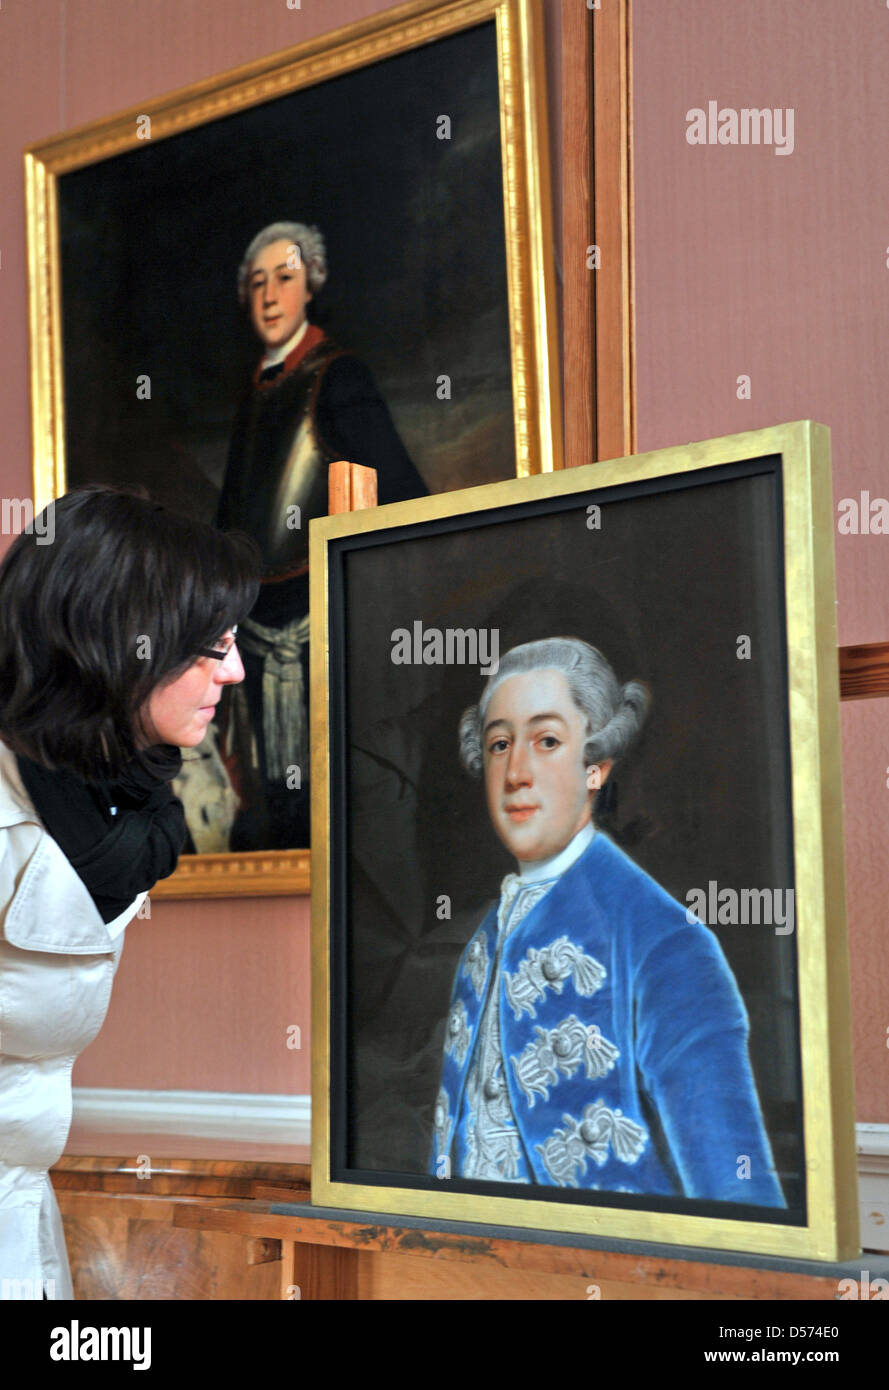 Eduard Prince of Anhalt smiles with two significant paintings by German painter Christoph Friedrich Reinhold Lisiewski (1725-1794) he received at Moigkau Palace in Dessau, Germany, 15 April 2010. The pastel paintings 'Leopold Frederick Franz of Anhalt-Dessau' (R) and 'Henriette Catharina Agnese of Anhalt-Dessau' (not pictured) were made some 250 years ago and derive from from the f Stock Photo